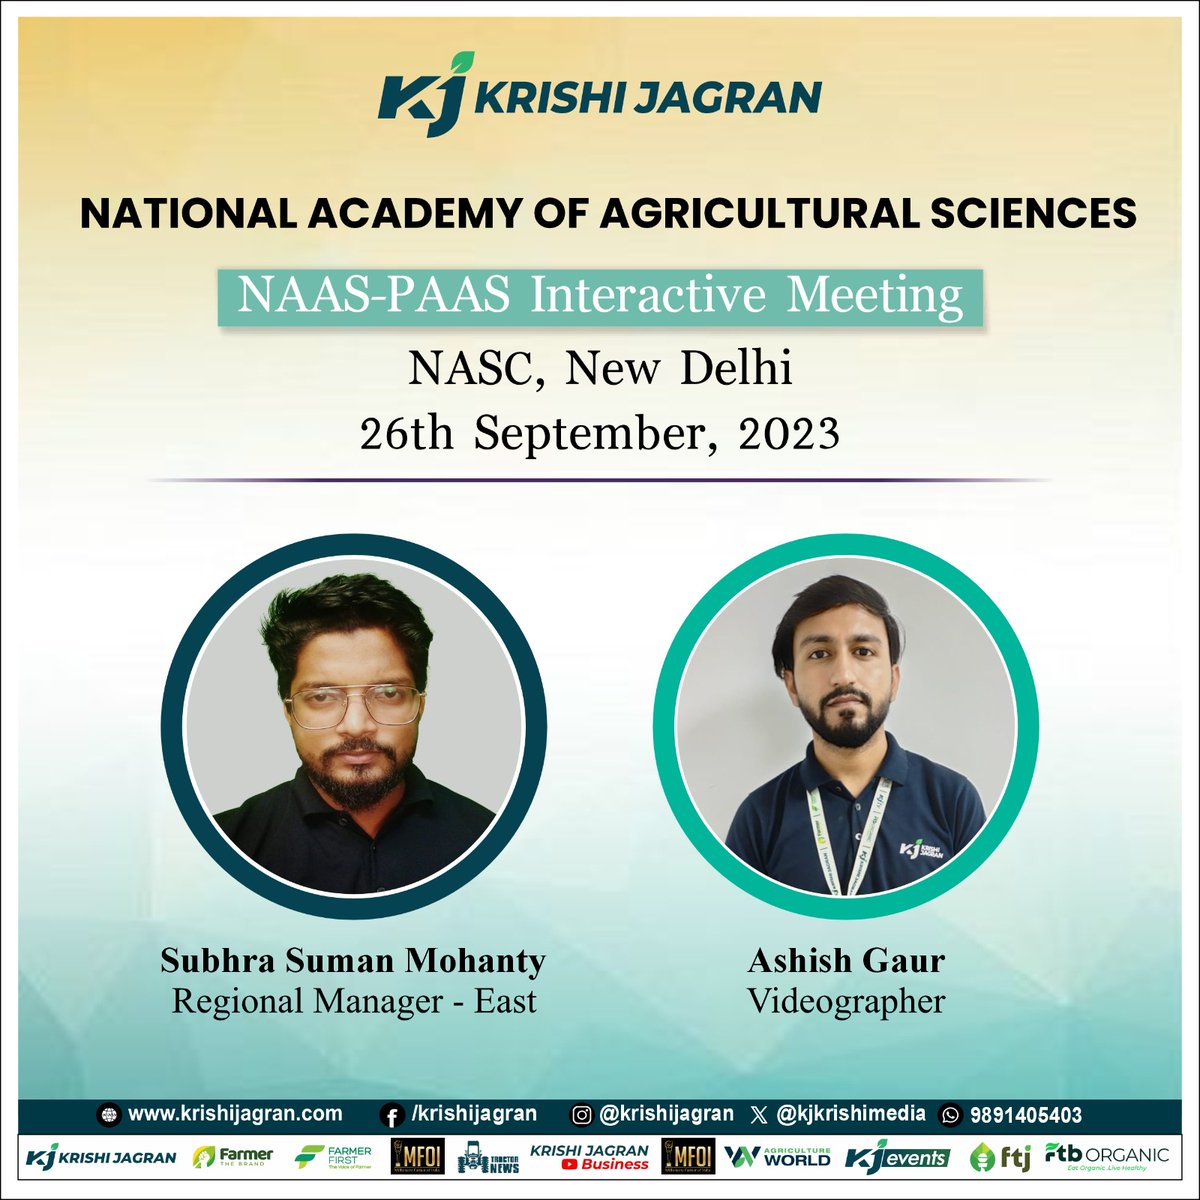 Krishi Jagran's team attended the National Academy of Agricultural Sciences NAAS-PAAS Interactive meeting on Sept 26, 2023.

#nationalacademy #NAAS #krishijagran #events